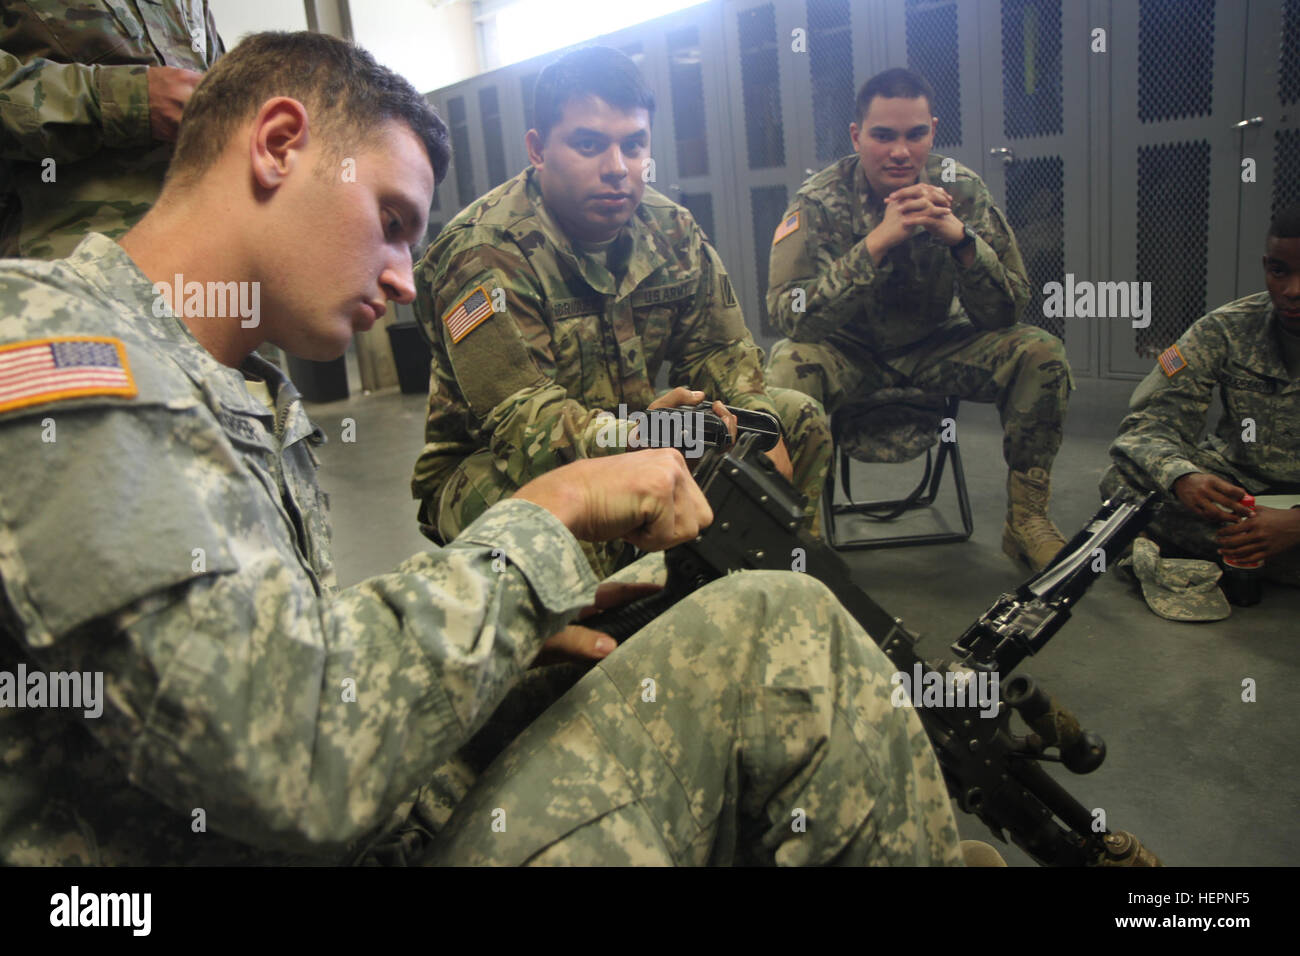 A Soldier of Company C, 3rd Battalion, 15th Infantry Regiment, 2nd Infantry Brigade Combat Team, 3rd Infantry Division, assembles an M240B machine gun Feb. 17, 2016, at Fort Stewart, Ga. The training is in preparation to earn the Expert Infantry Badge.  (U.S. Army photo by Spc. Corey Foreman / Released) Soldiers set sights on EIB 160217-A-XX999-0001 Stock Photo